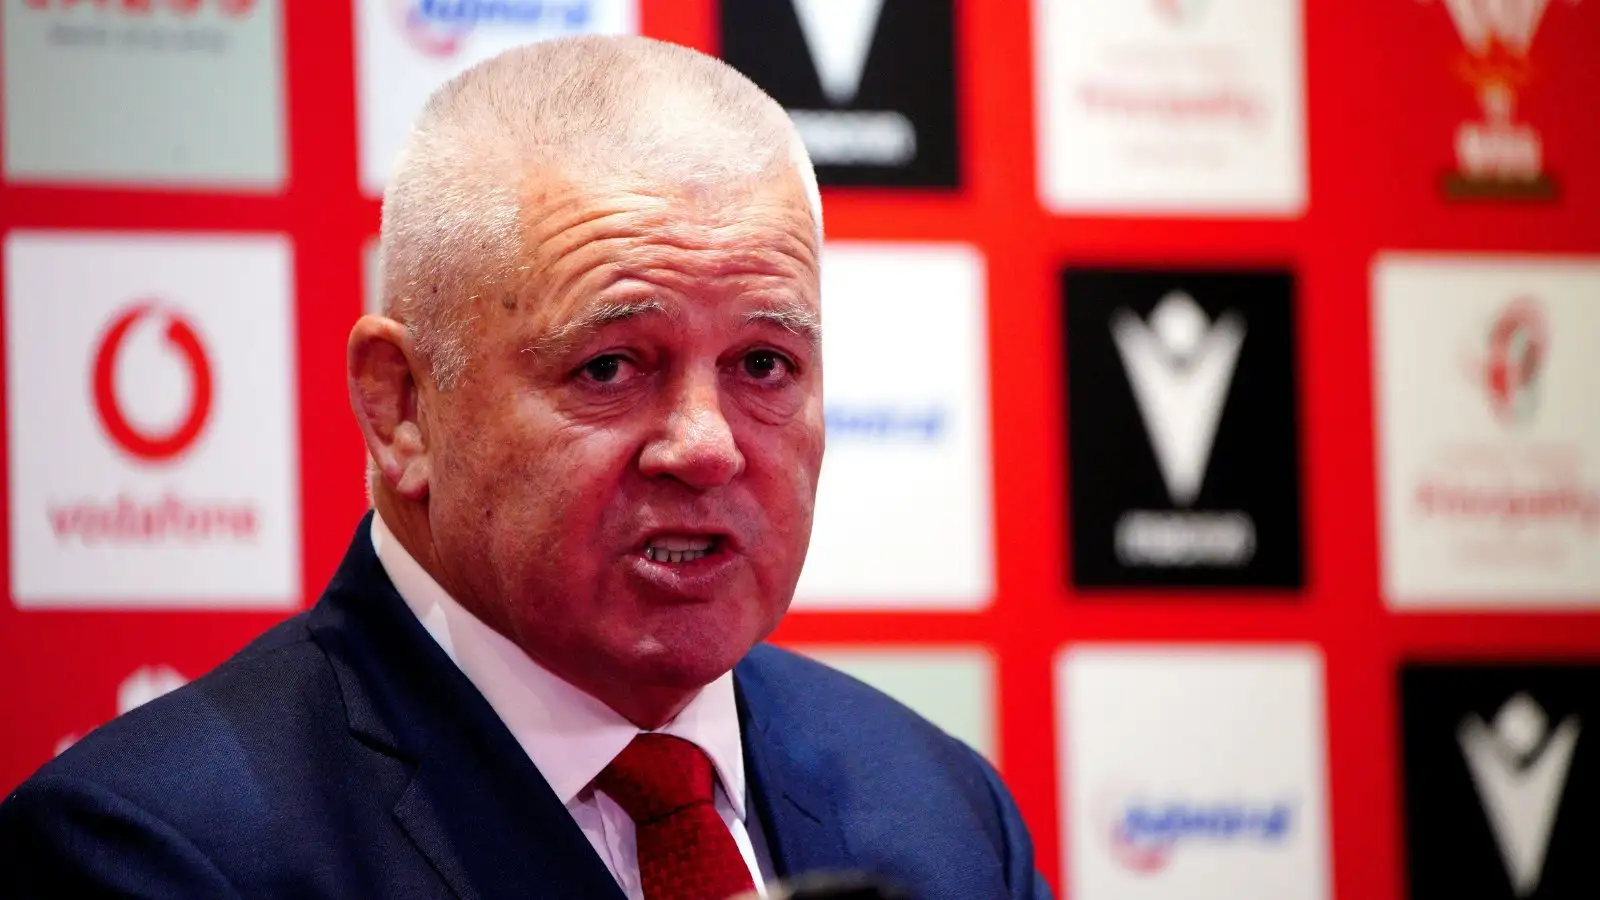 Warren Gatland has started preparations for the 2023 Six Nations by retaining two assistant coaches from Wayne Pivac’s backroom staff while releasing two. Forwards coach Jonathan Humphreys and skills and kicking coach Neil Jenkins will continue their roles under Gatland while attack coach Stephen Jones and defence Gethin Jenkins have been released.